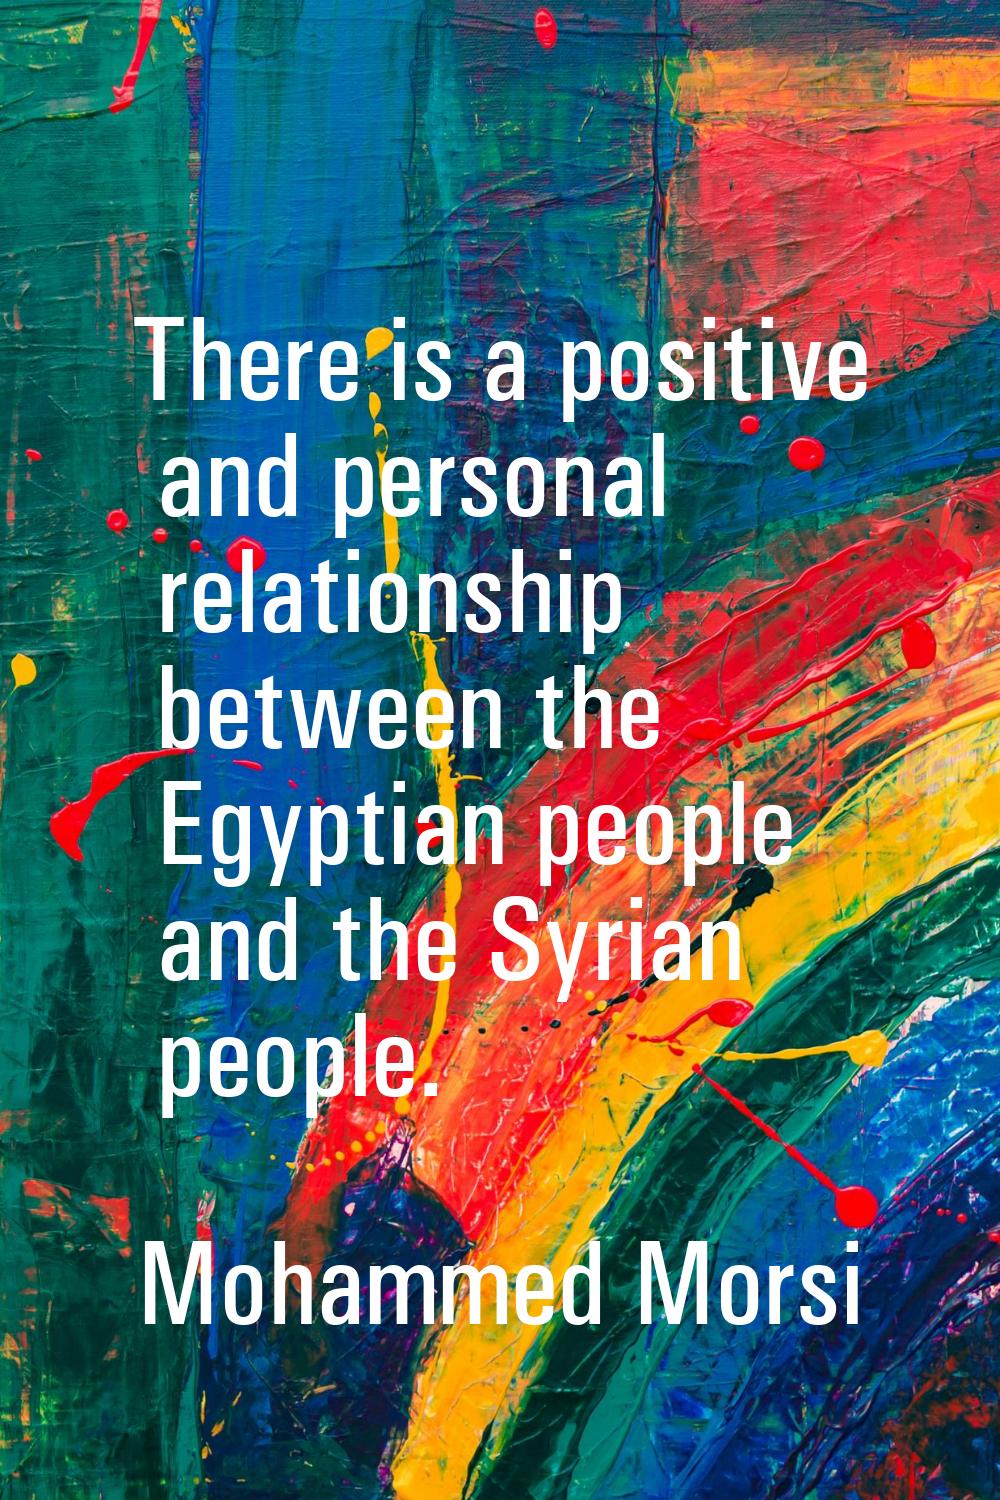 There is a positive and personal relationship between the Egyptian people and the Syrian people.